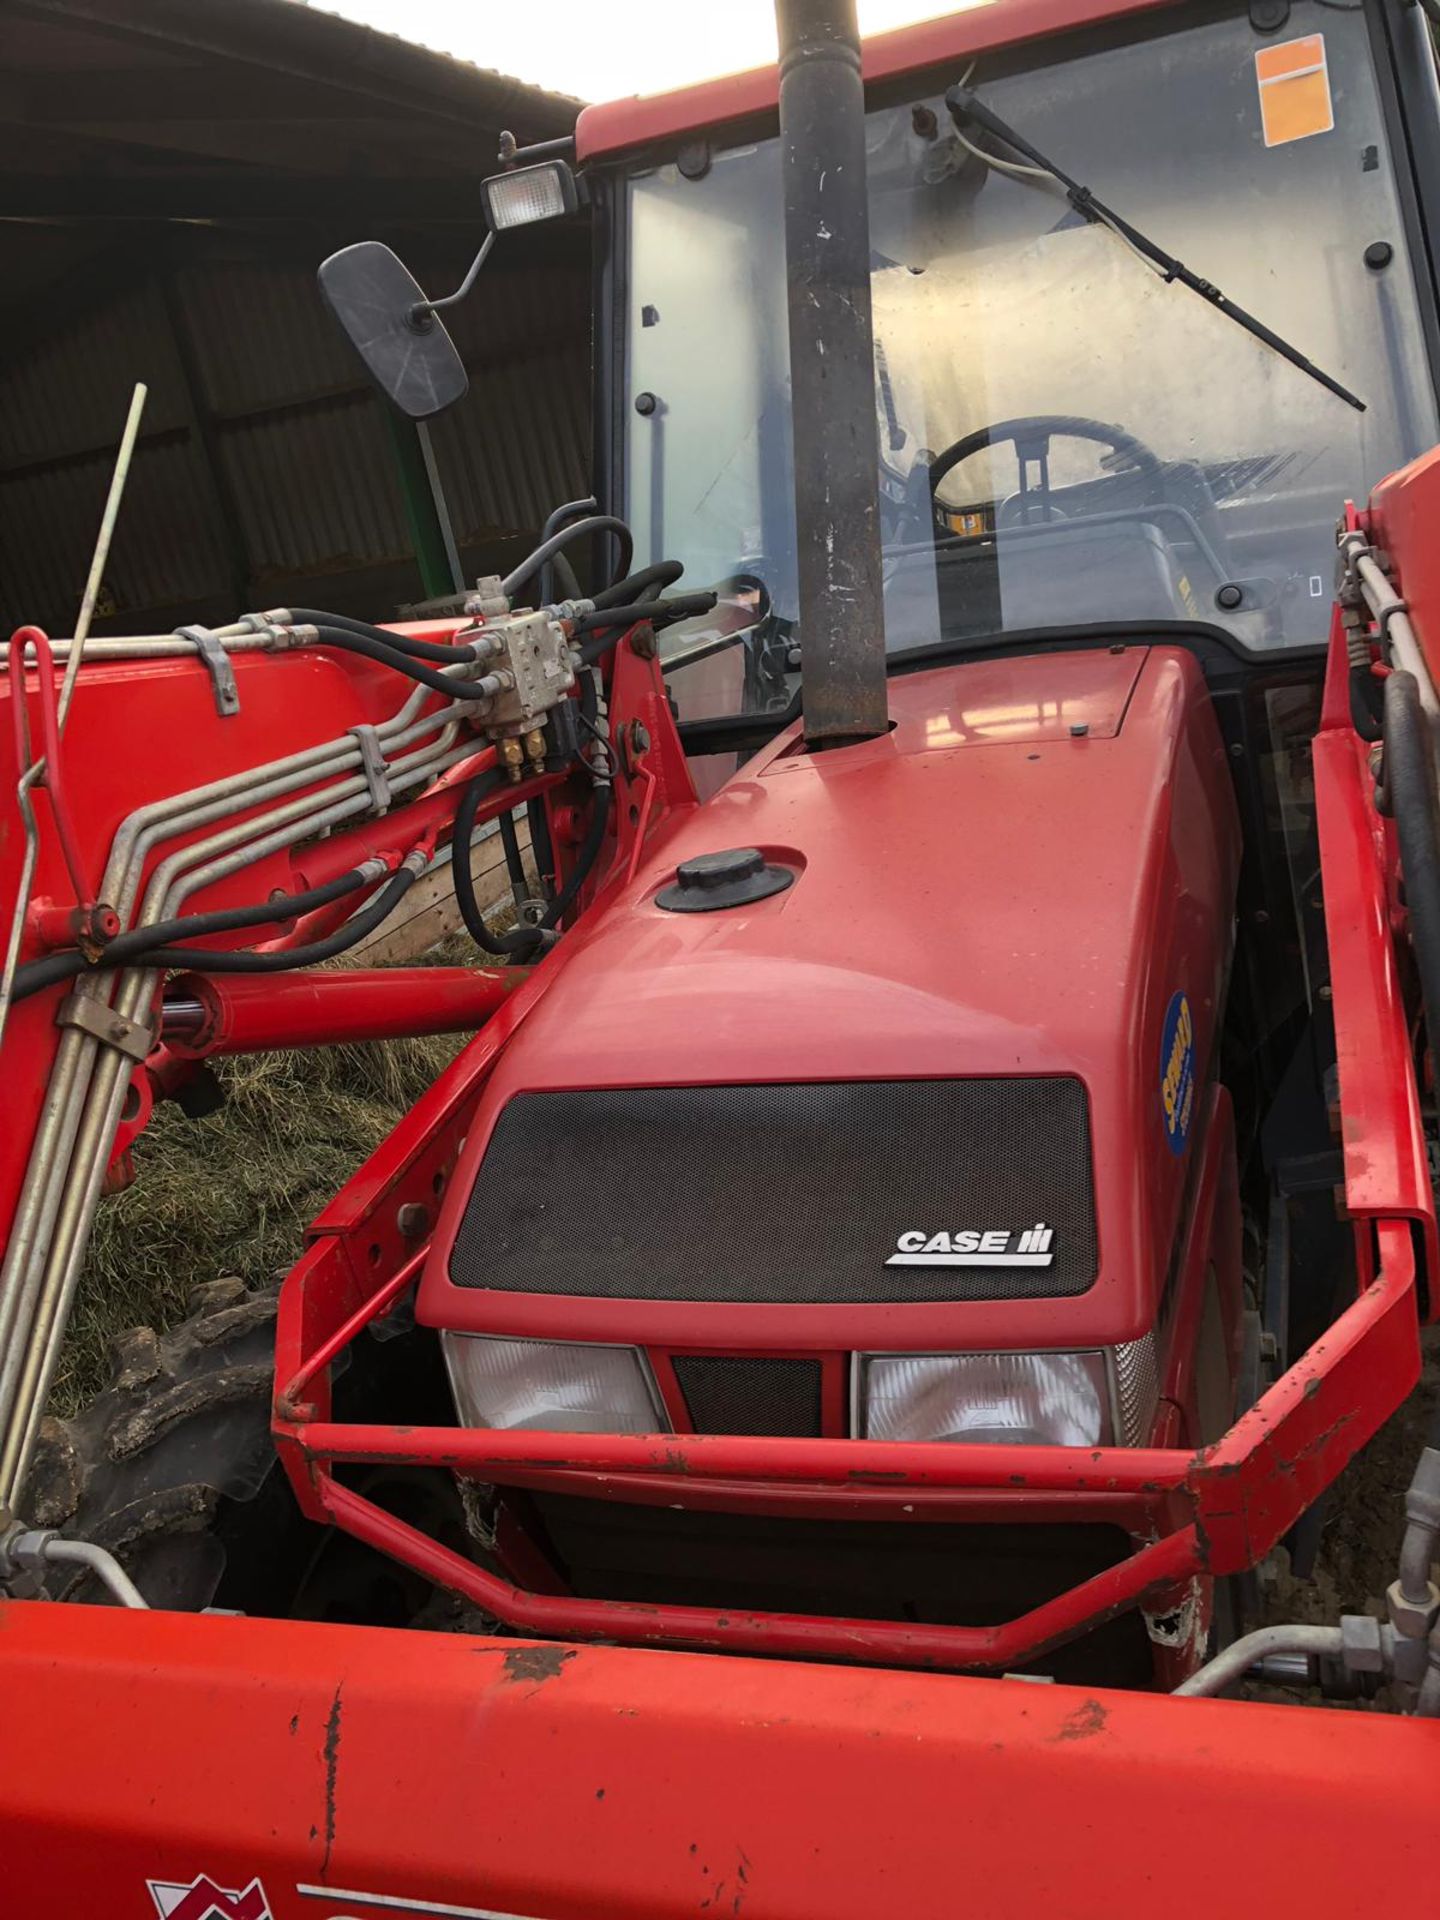 1996/P REG CASE IH 4230 DIESEL TRACTOR WITH CHILLTON MX 40-70 SPIKED LOADER *PLUS VAT* - Image 7 of 23